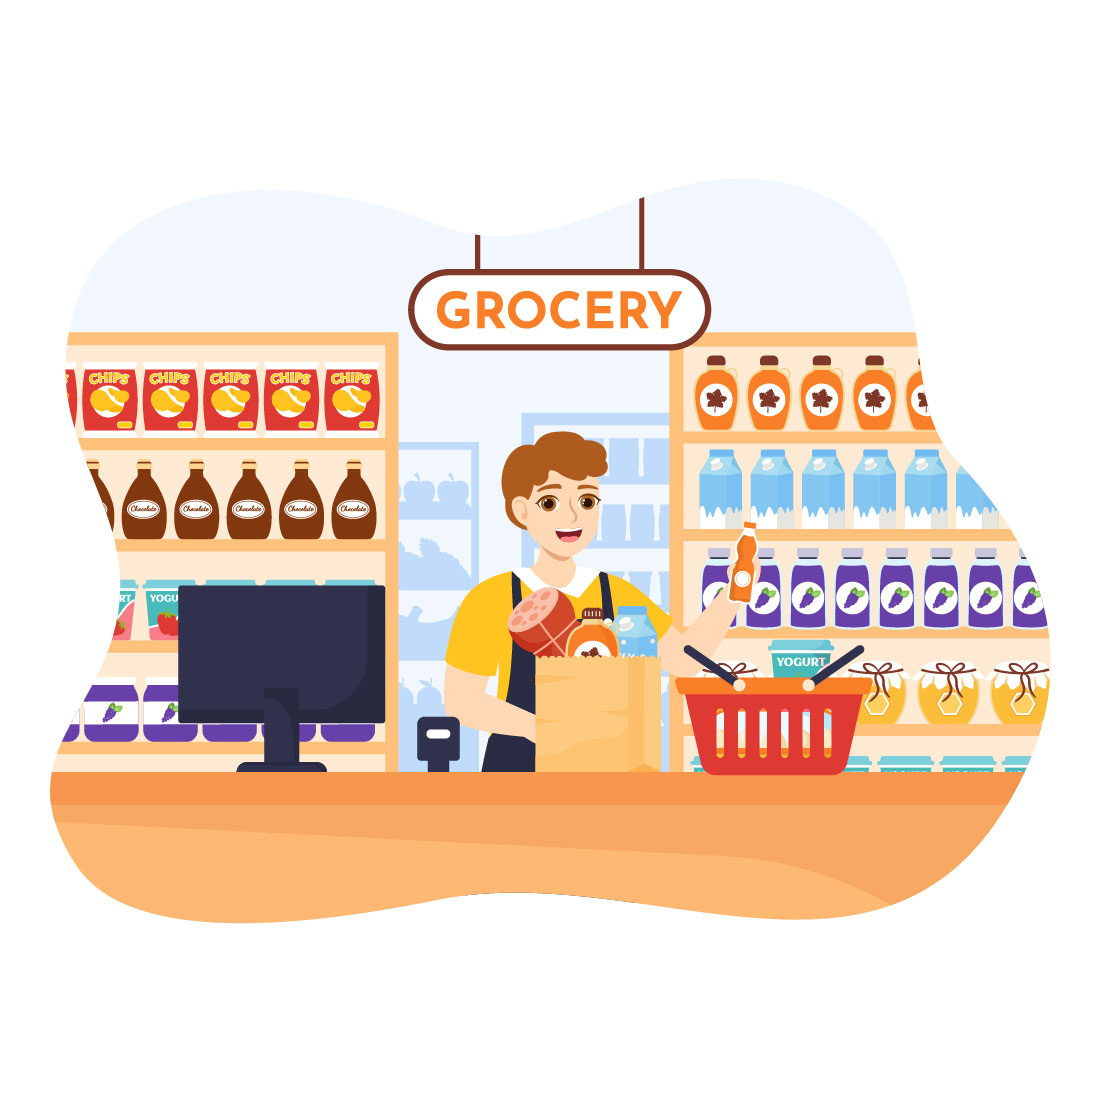 16 Food Grocery Store Shopping Illustration cover image.